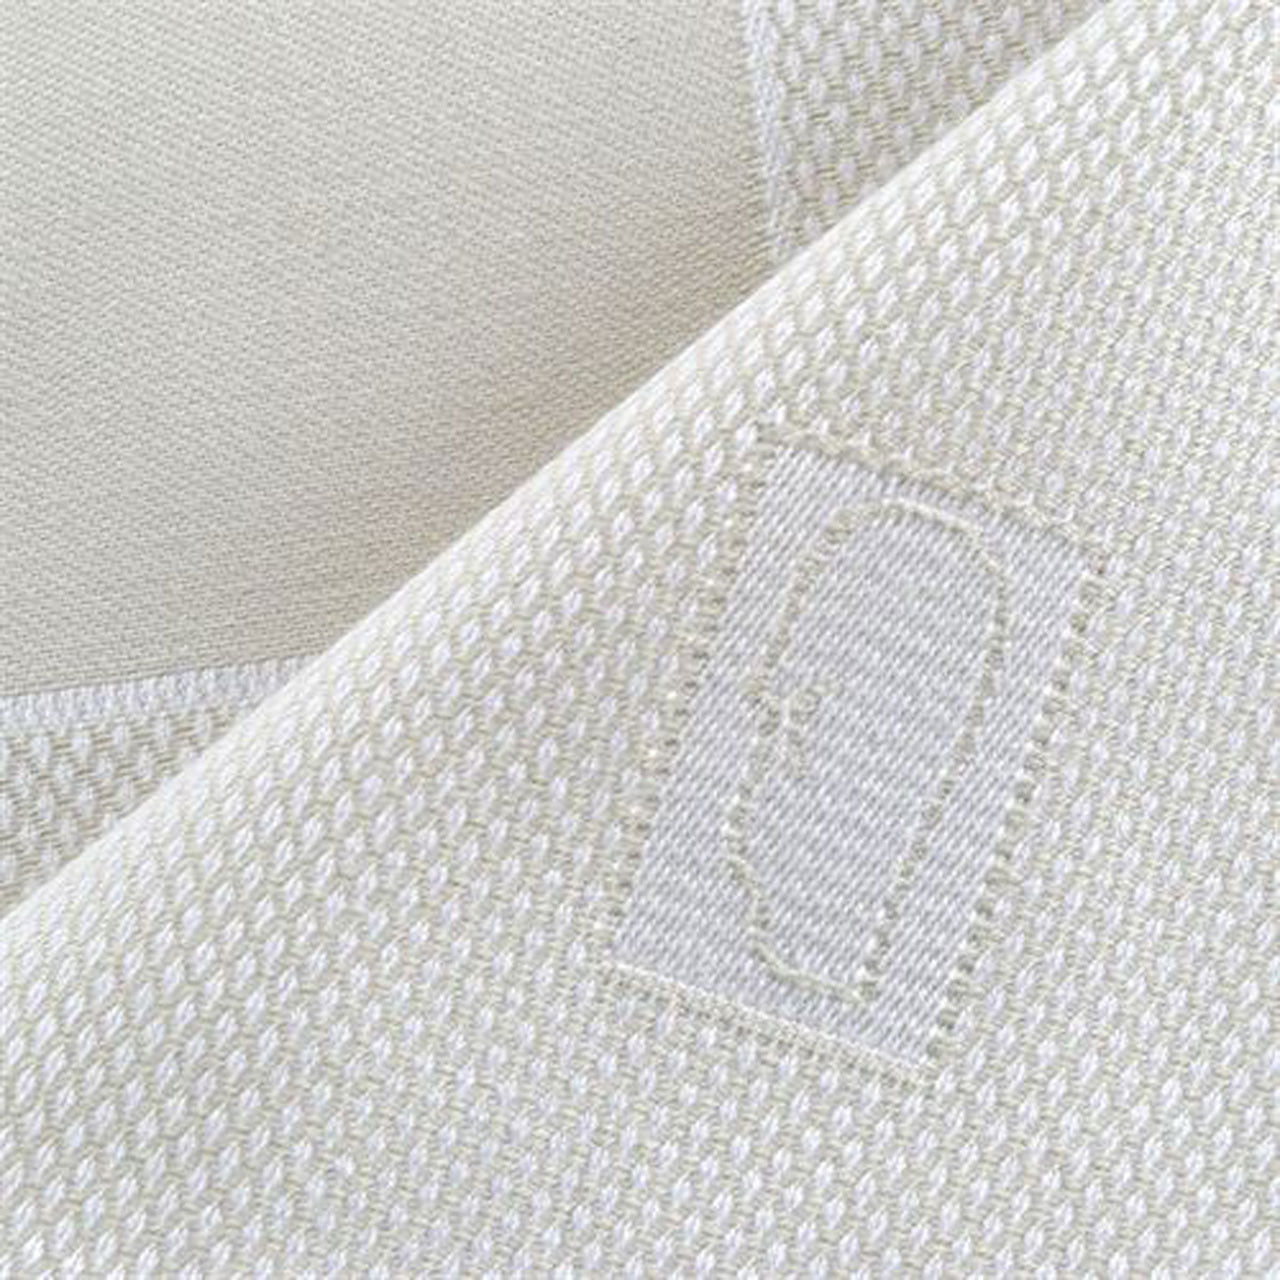 What is the best fabric for wedding napkins and are these considered wholesale wedding napkins?